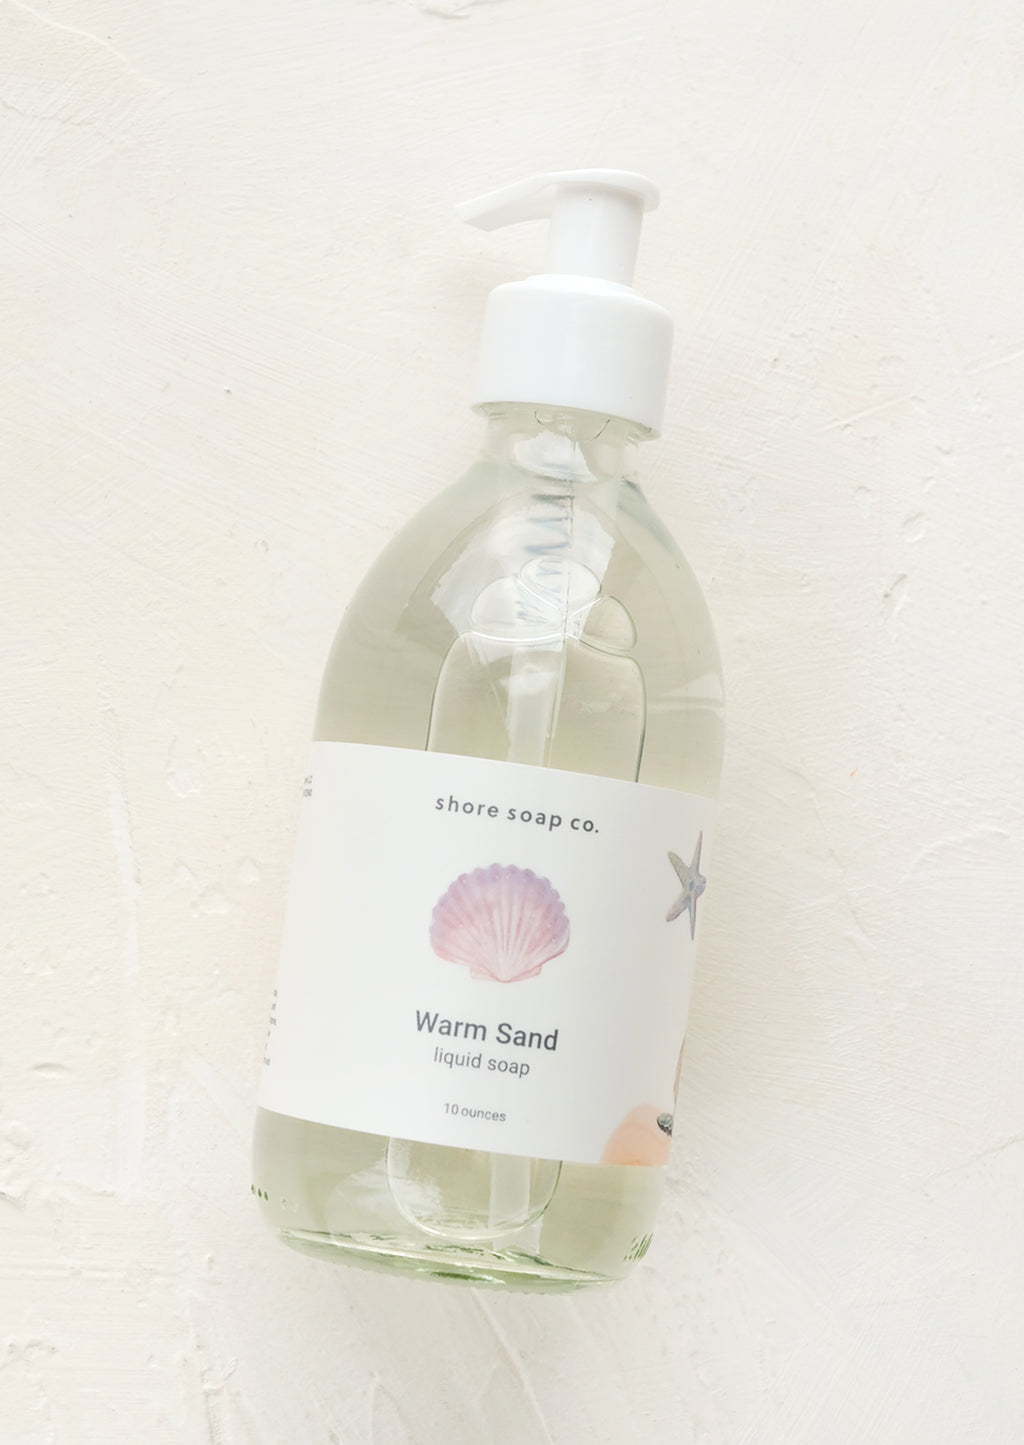 Warm Sand: A glass pump bottle containing liquid soap in "Warm sand" scent.